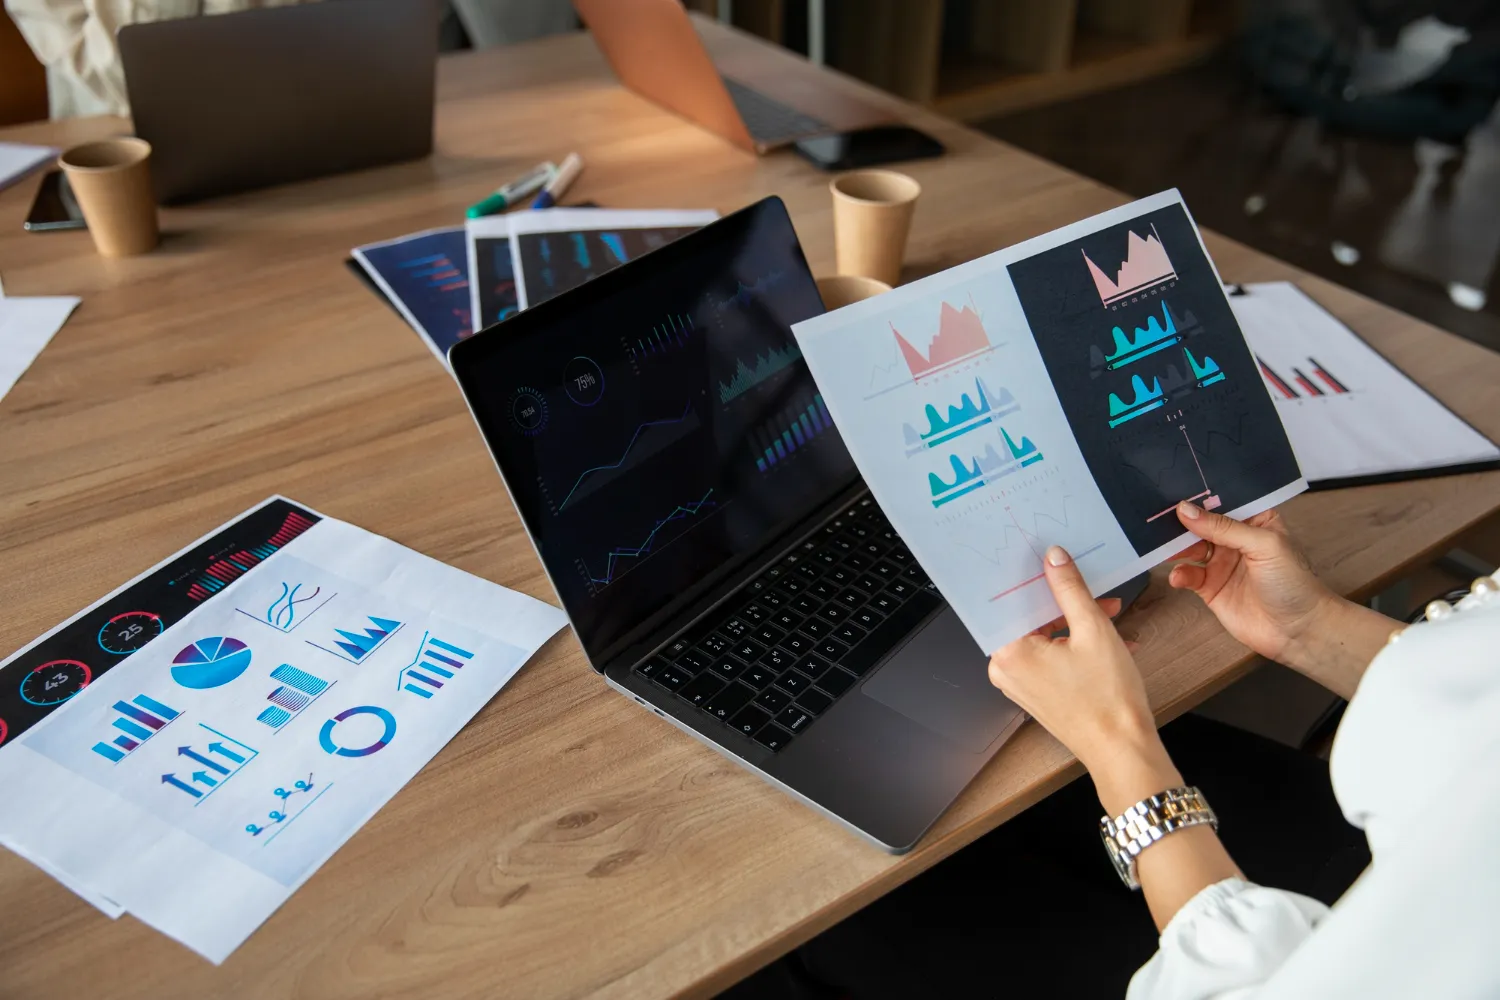 An individual reviews data charts and analytics on printouts and a laptop, representing JOH Partners' focus on big data analytics for strategic insights.